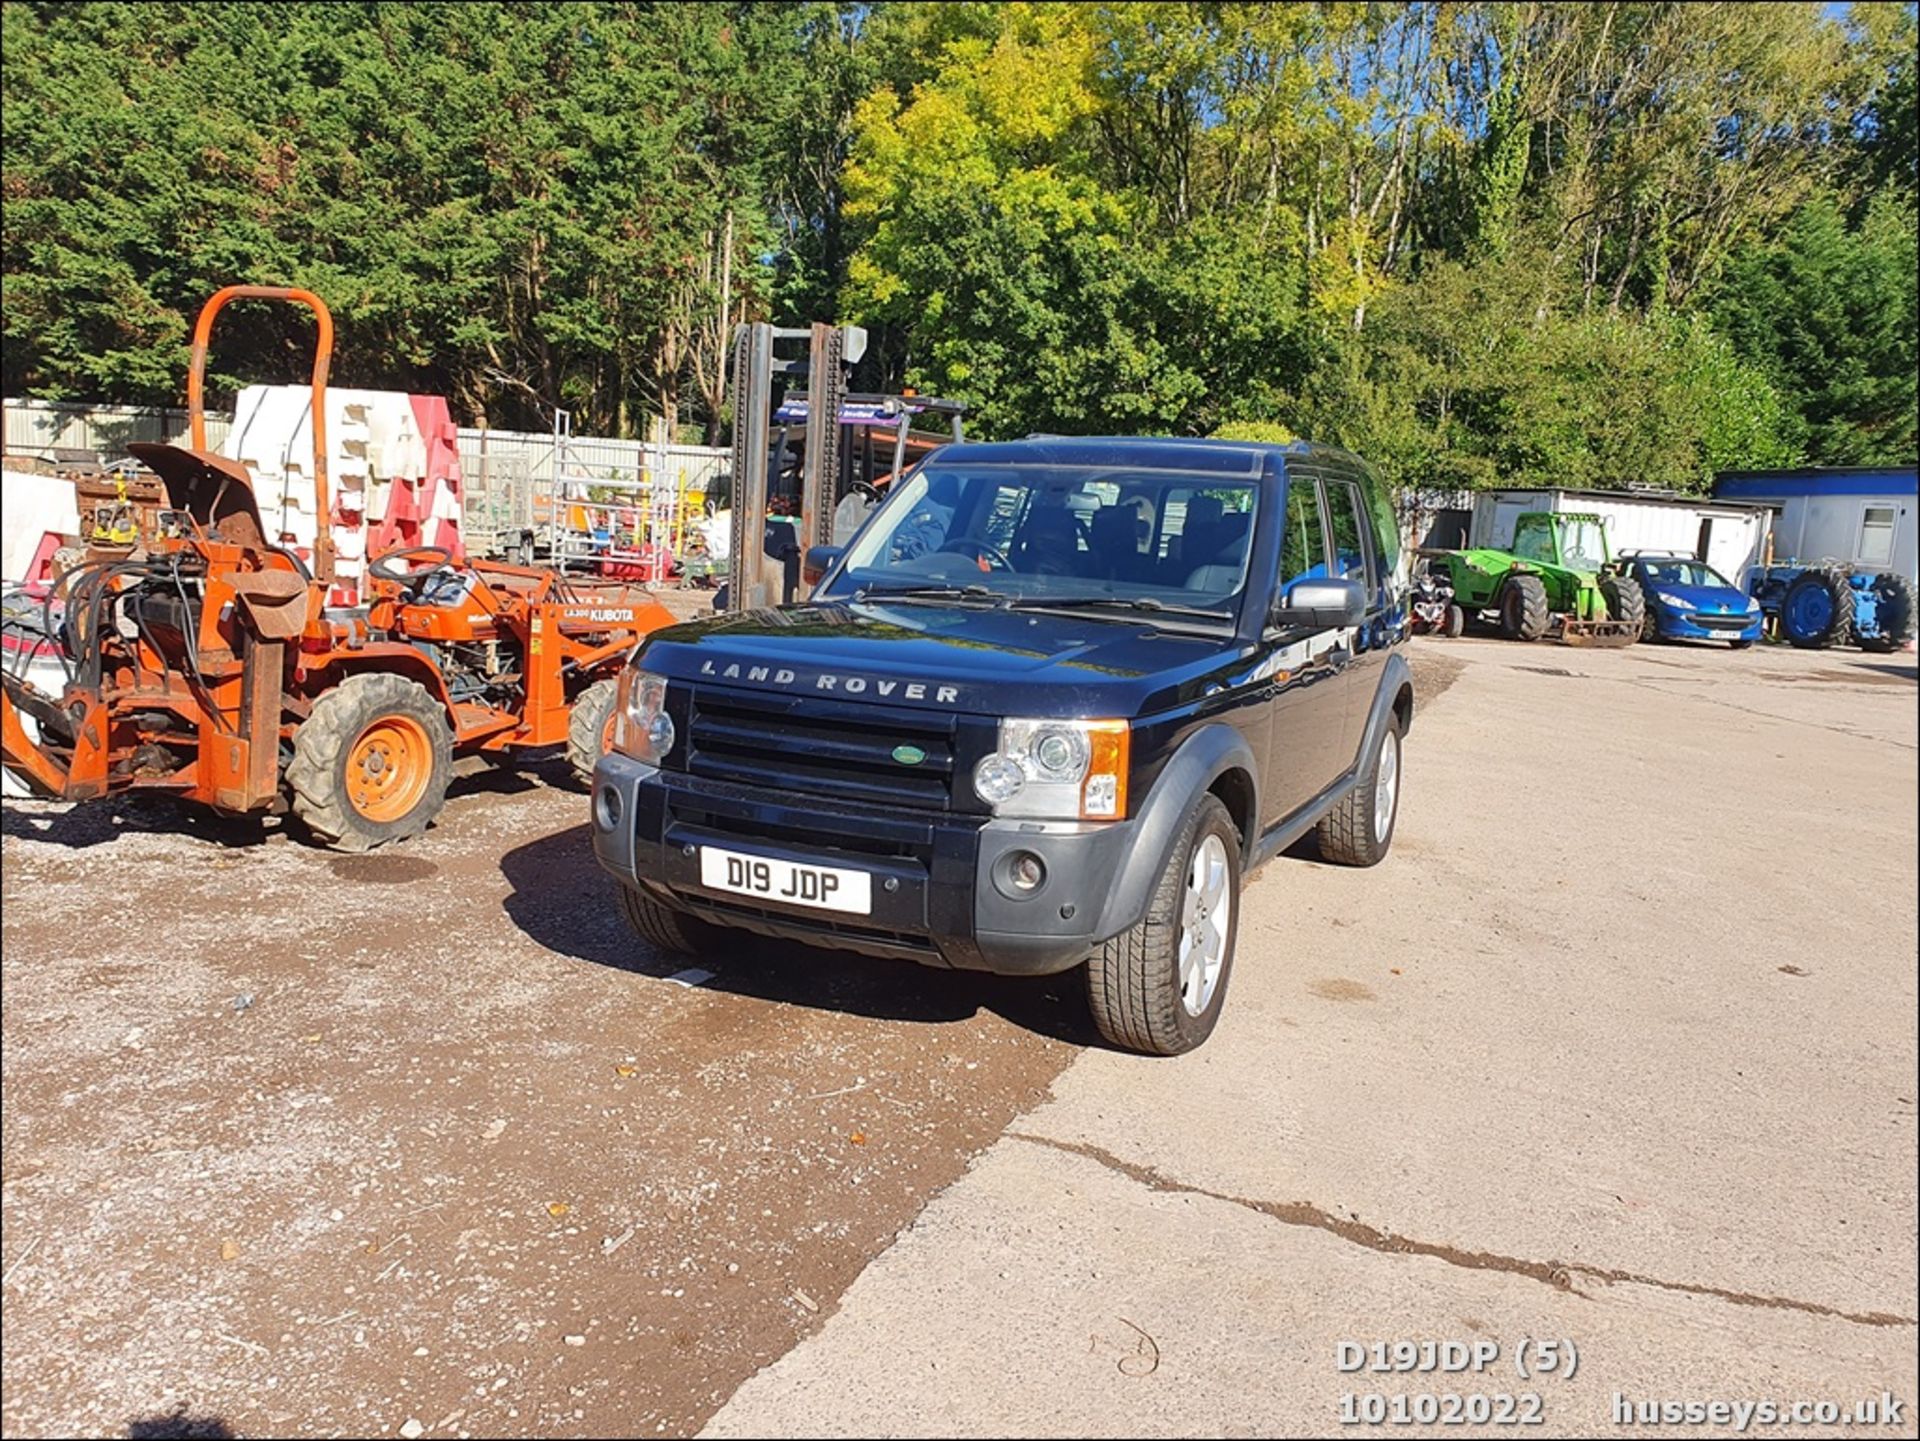 2008 LAND ROVER DISCOVERY TDV6 HSE A - 2720cc 5dr Estate (Blue, 164k) - Image 6 of 36